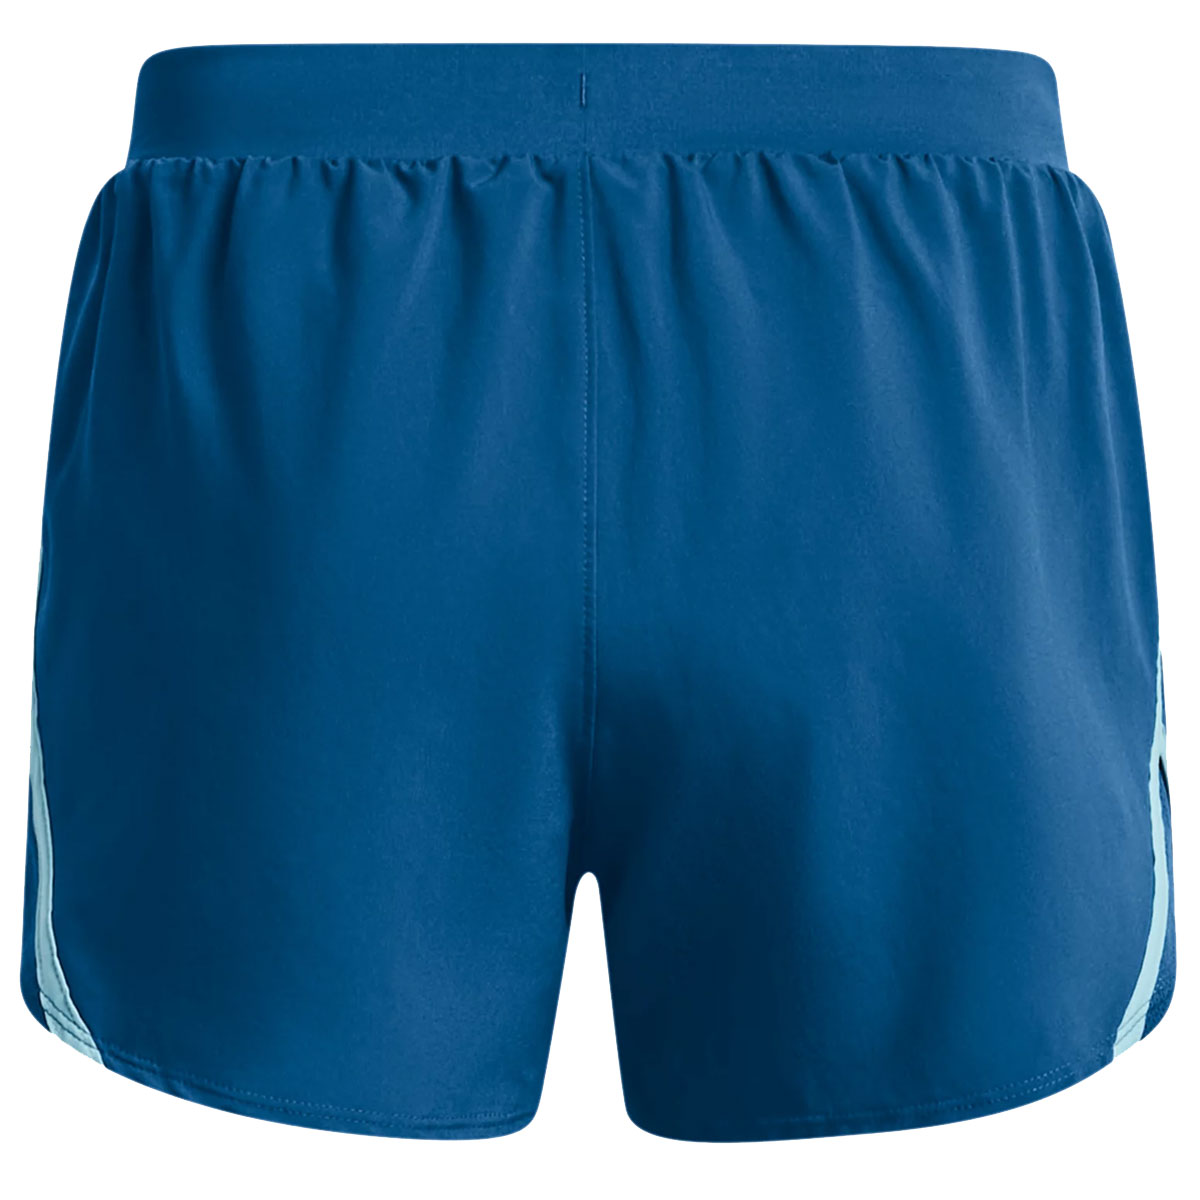 Under Armour Fly By 2.0 Training Shorts - Womens - Varsity Blue/Blizzard/Reflective